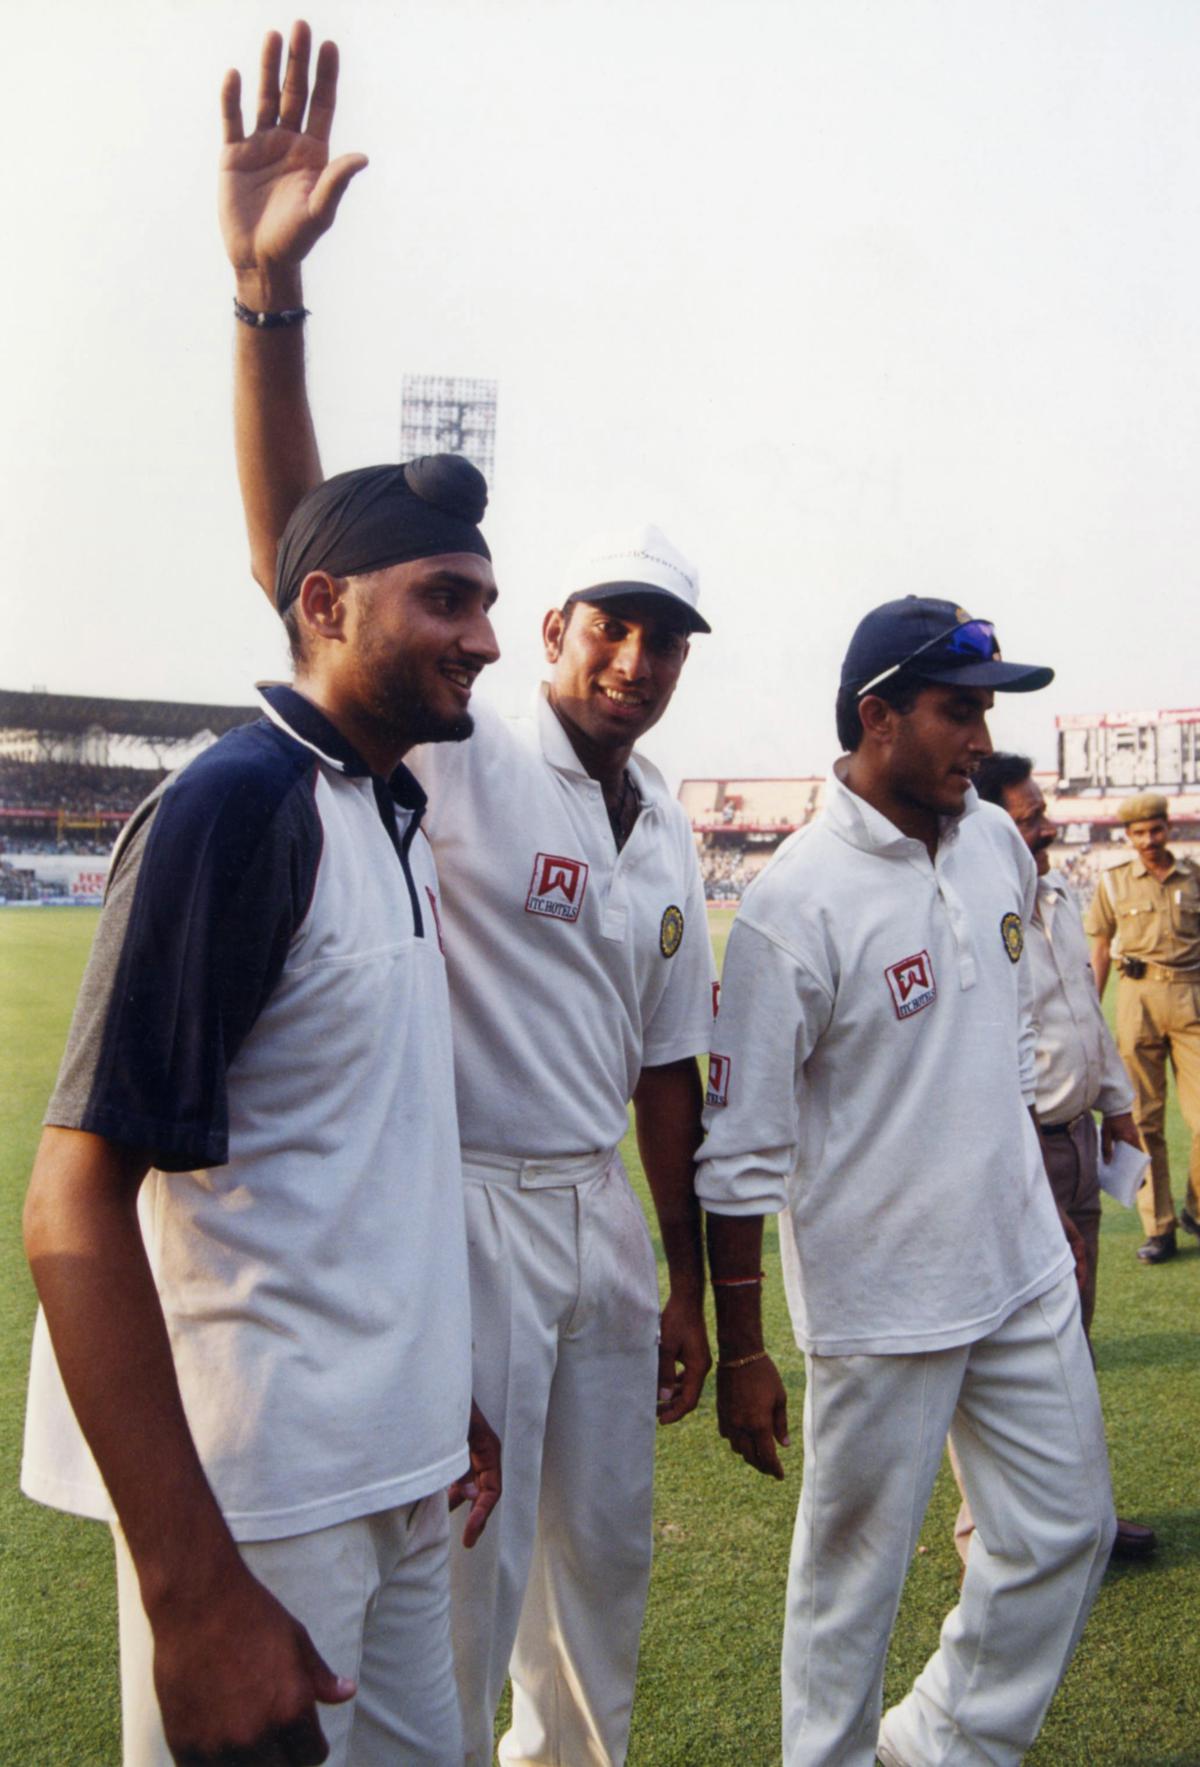 Harbhajan Singh, V.V.S. Laxman and Sourav Ganguly of India during their victory lap after winning the second Test cricket match between India and Australia at Eden Gardens, Calcutta on March 15, 2001. India won by 171 runs.